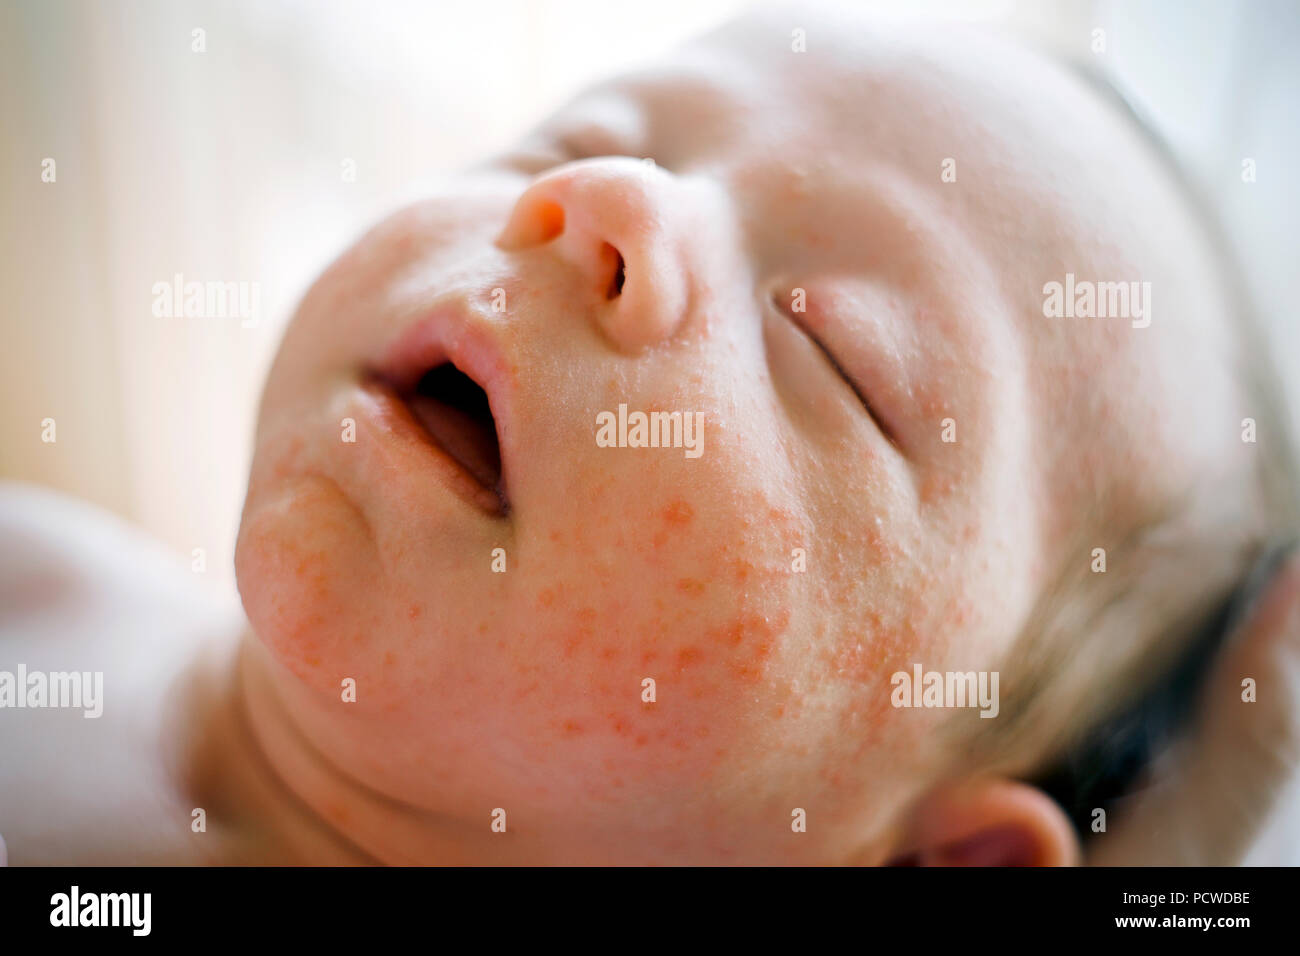 Newborn baby boy face with many red pimples caused by atopic dermatitis Stock Photo